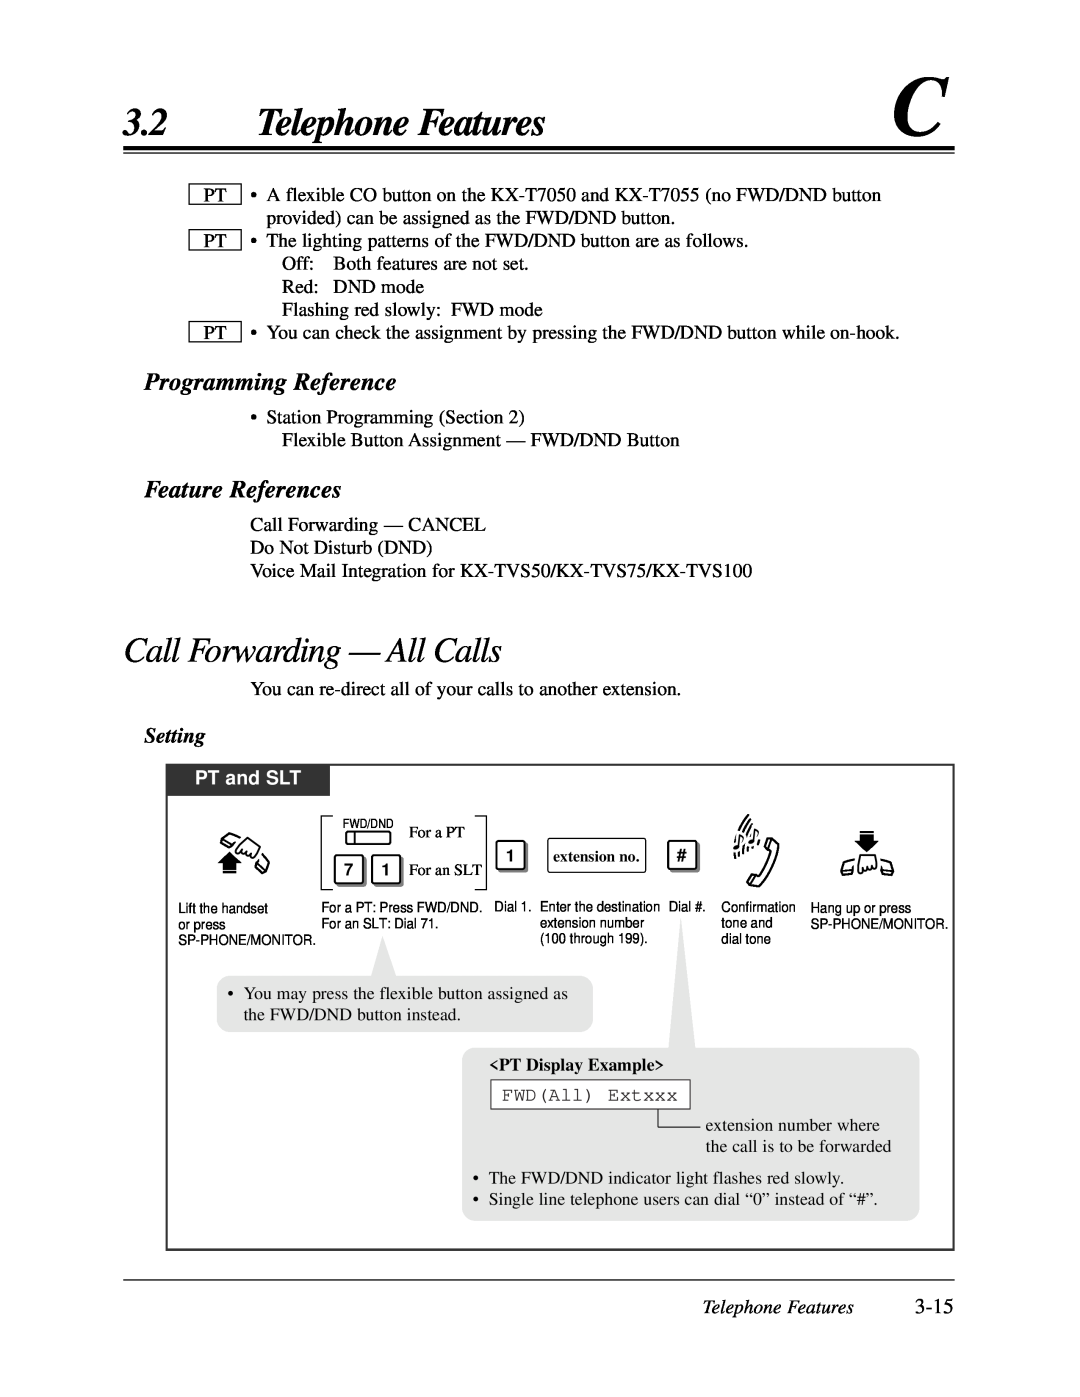 Panasonic KX-TA624 Call Forwarding - All Calls, 3-15, Telephone Features, Programming Reference, Feature References 